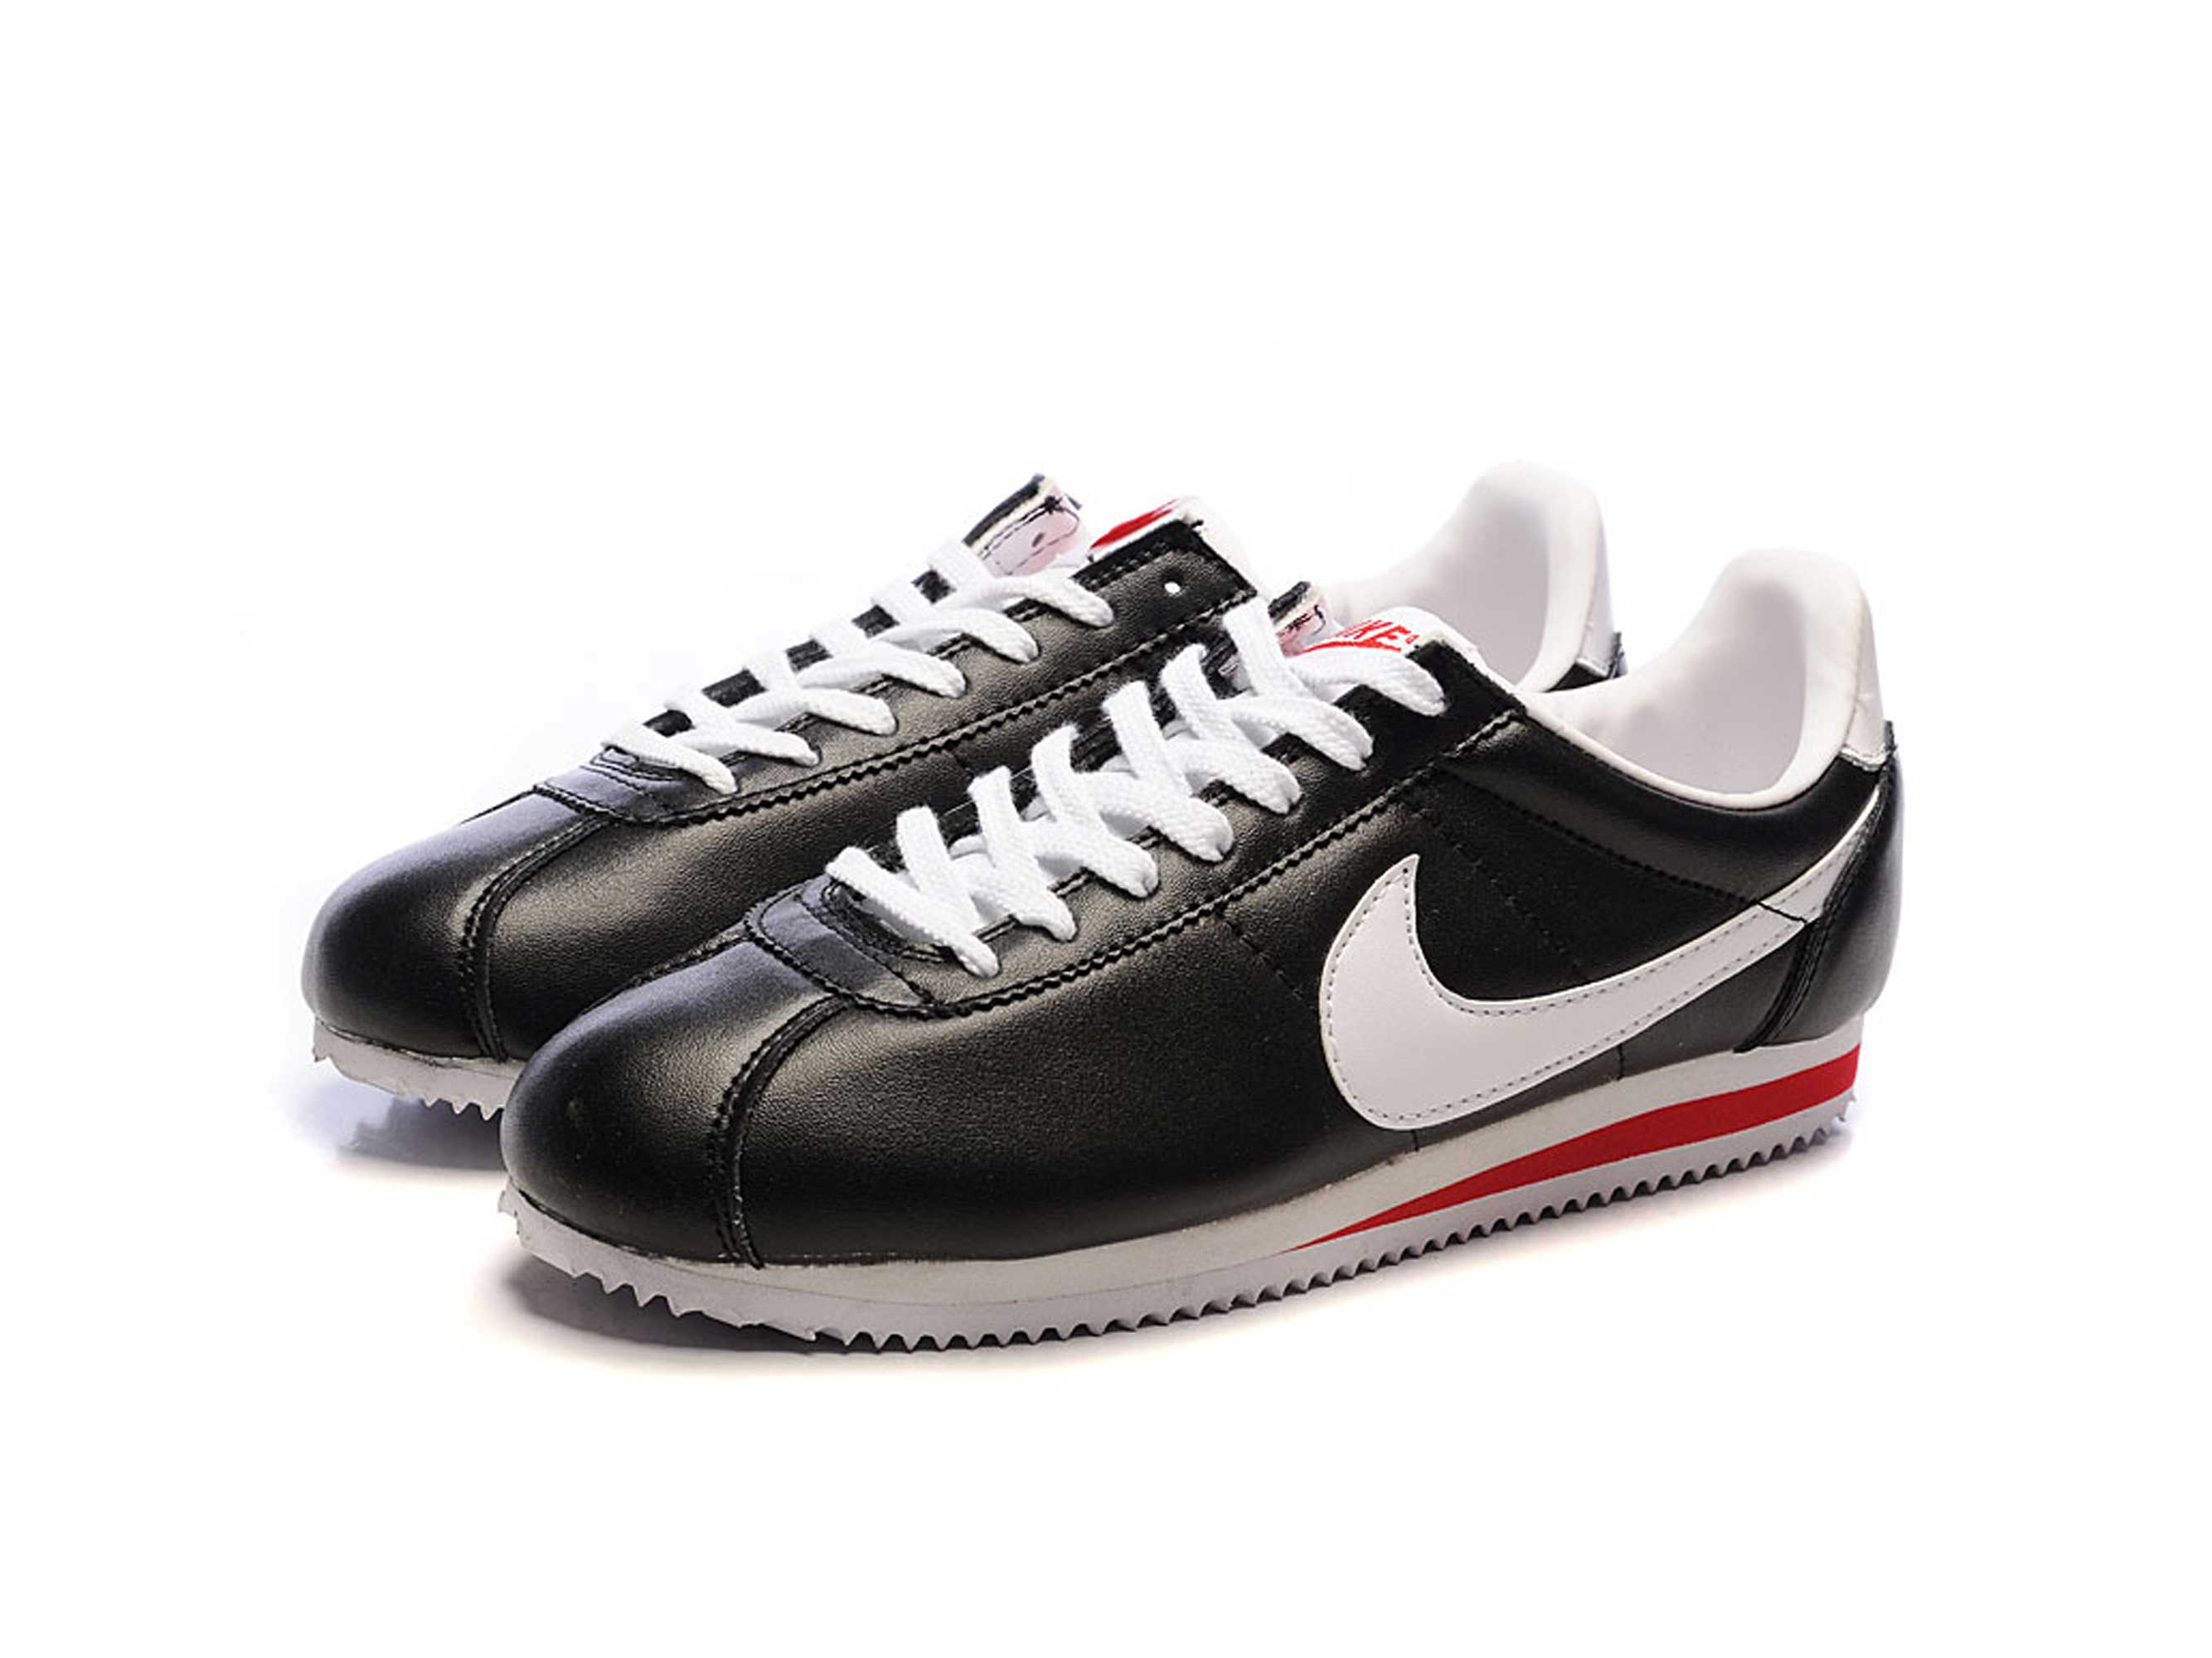 red and white nike cortez